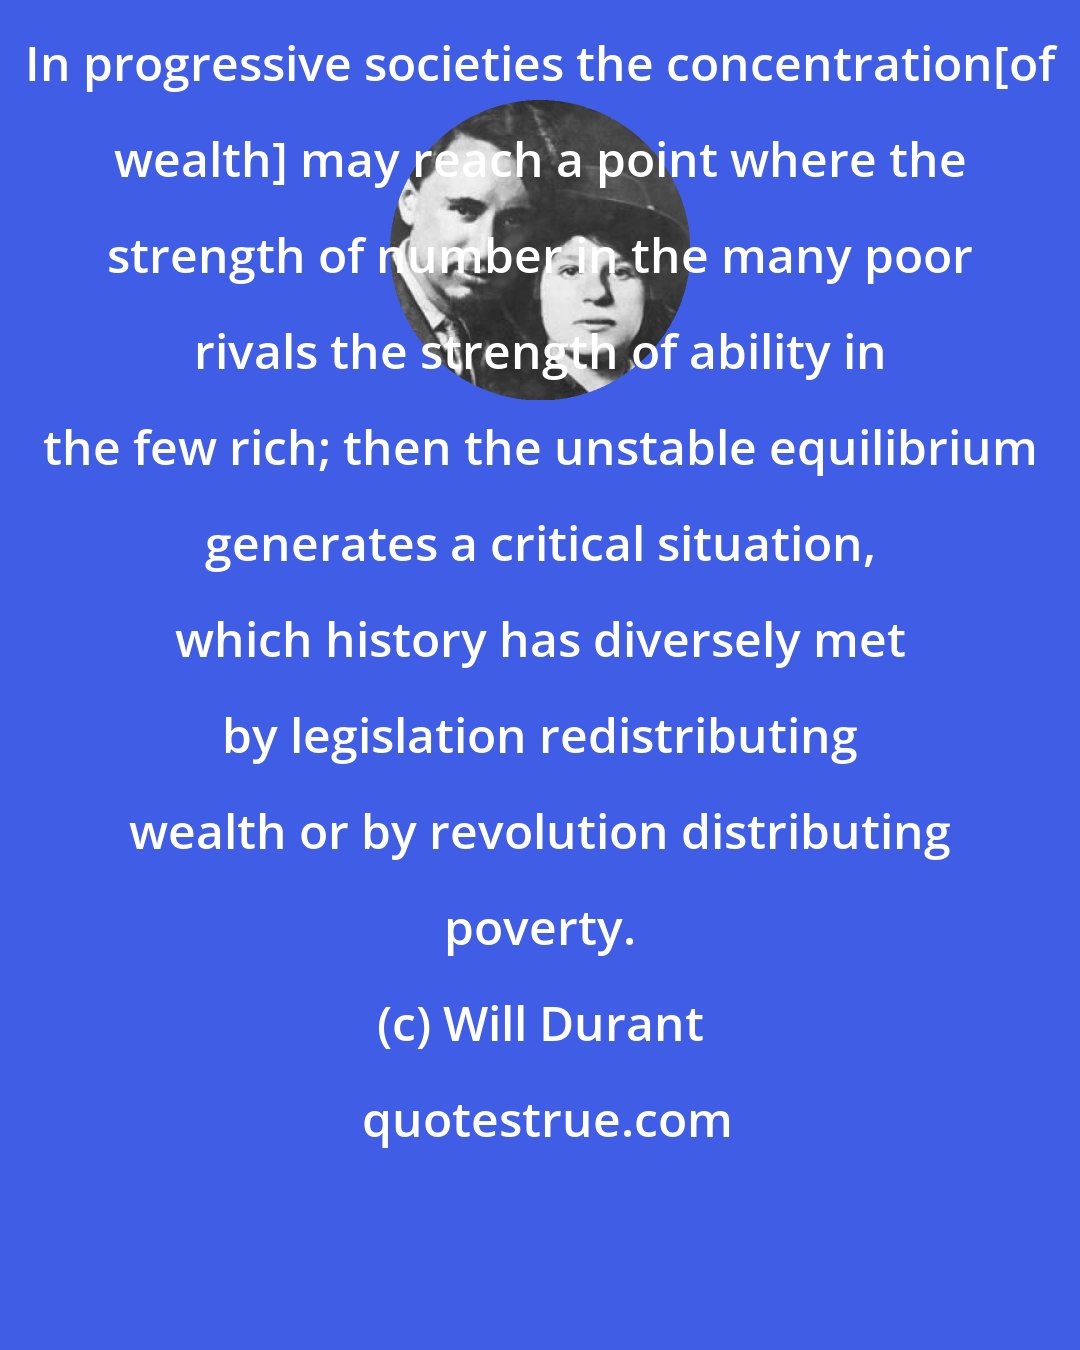 Will Durant: In progressive societies the concentration[of wealth] may reach a point where the strength of number in the many poor rivals the strength of ability in the few rich; then the unstable equilibrium generates a critical situation, which history has diversely met by legislation redistributing wealth or by revolution distributing poverty.